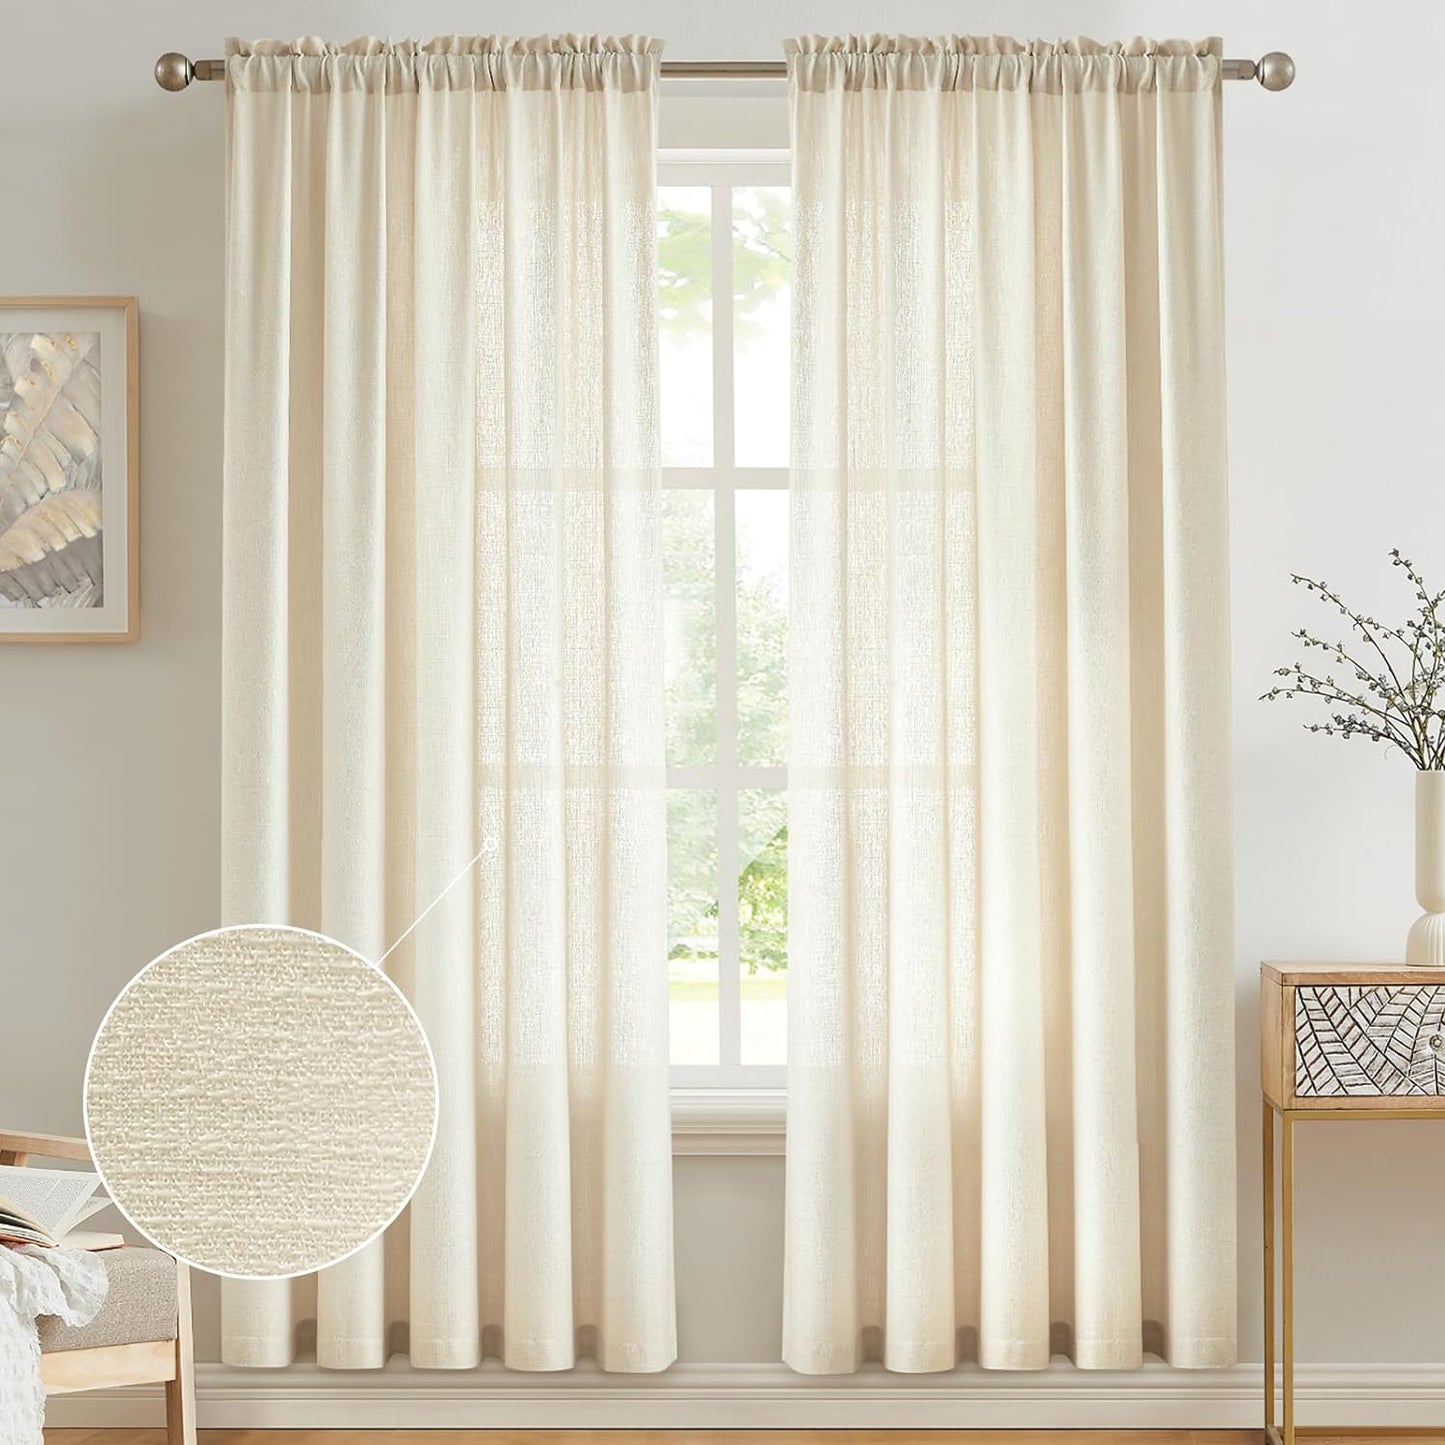 Anpark White Semi Sheer Curtains Linen Rod Pocket Curtains Tiebacks Included Semi Sheers, Privacy & Serenity for Bedroom, Soft Light for Relaxation - 52" W X 84" L, 2 Panels  Anpark Beige 52X84 Inch 